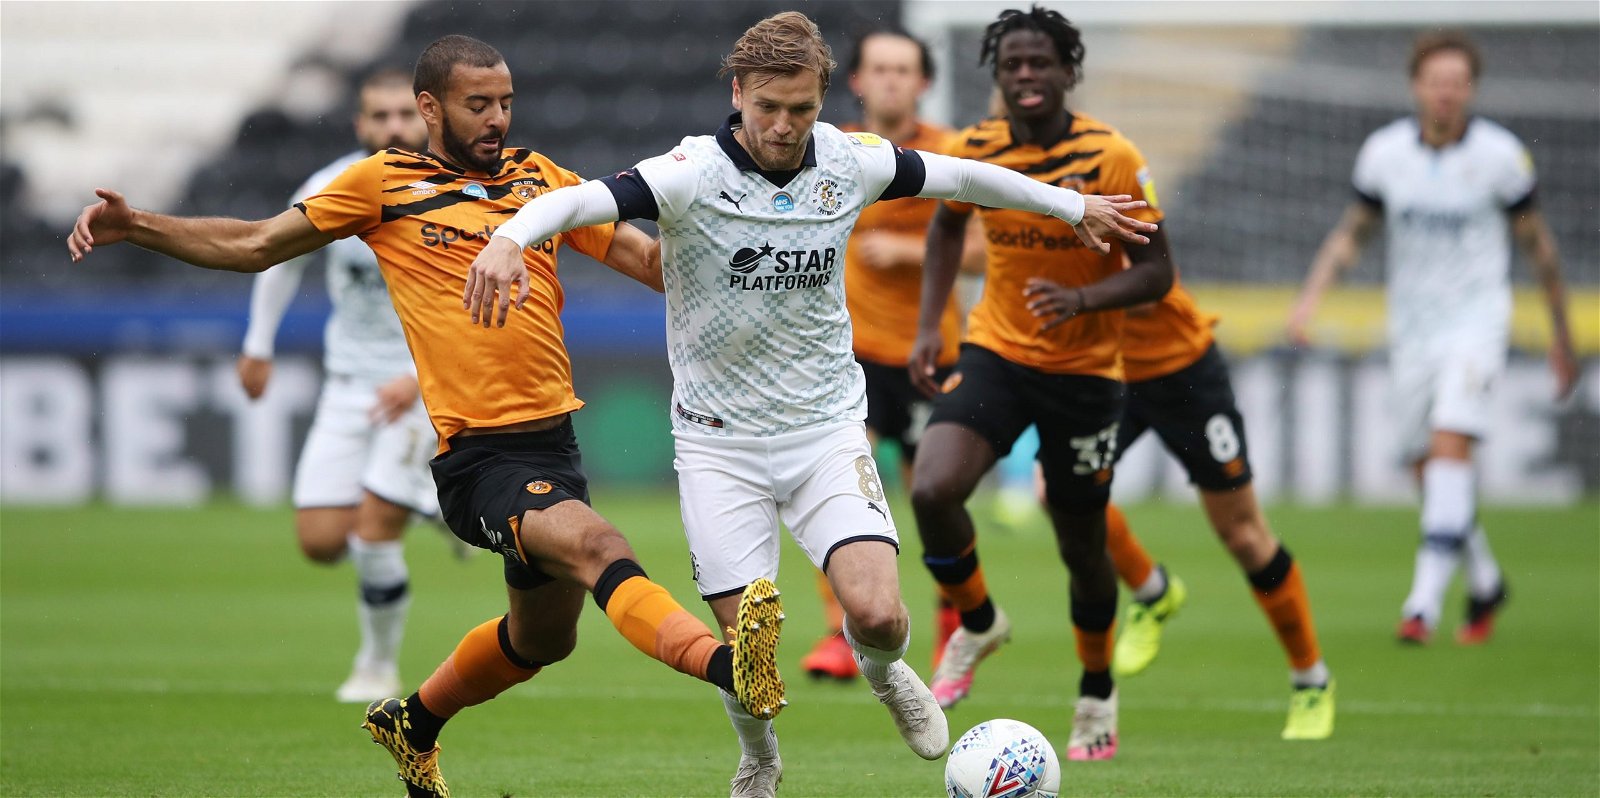 , Luton Town need to agree terms with 28-year-old midfielder